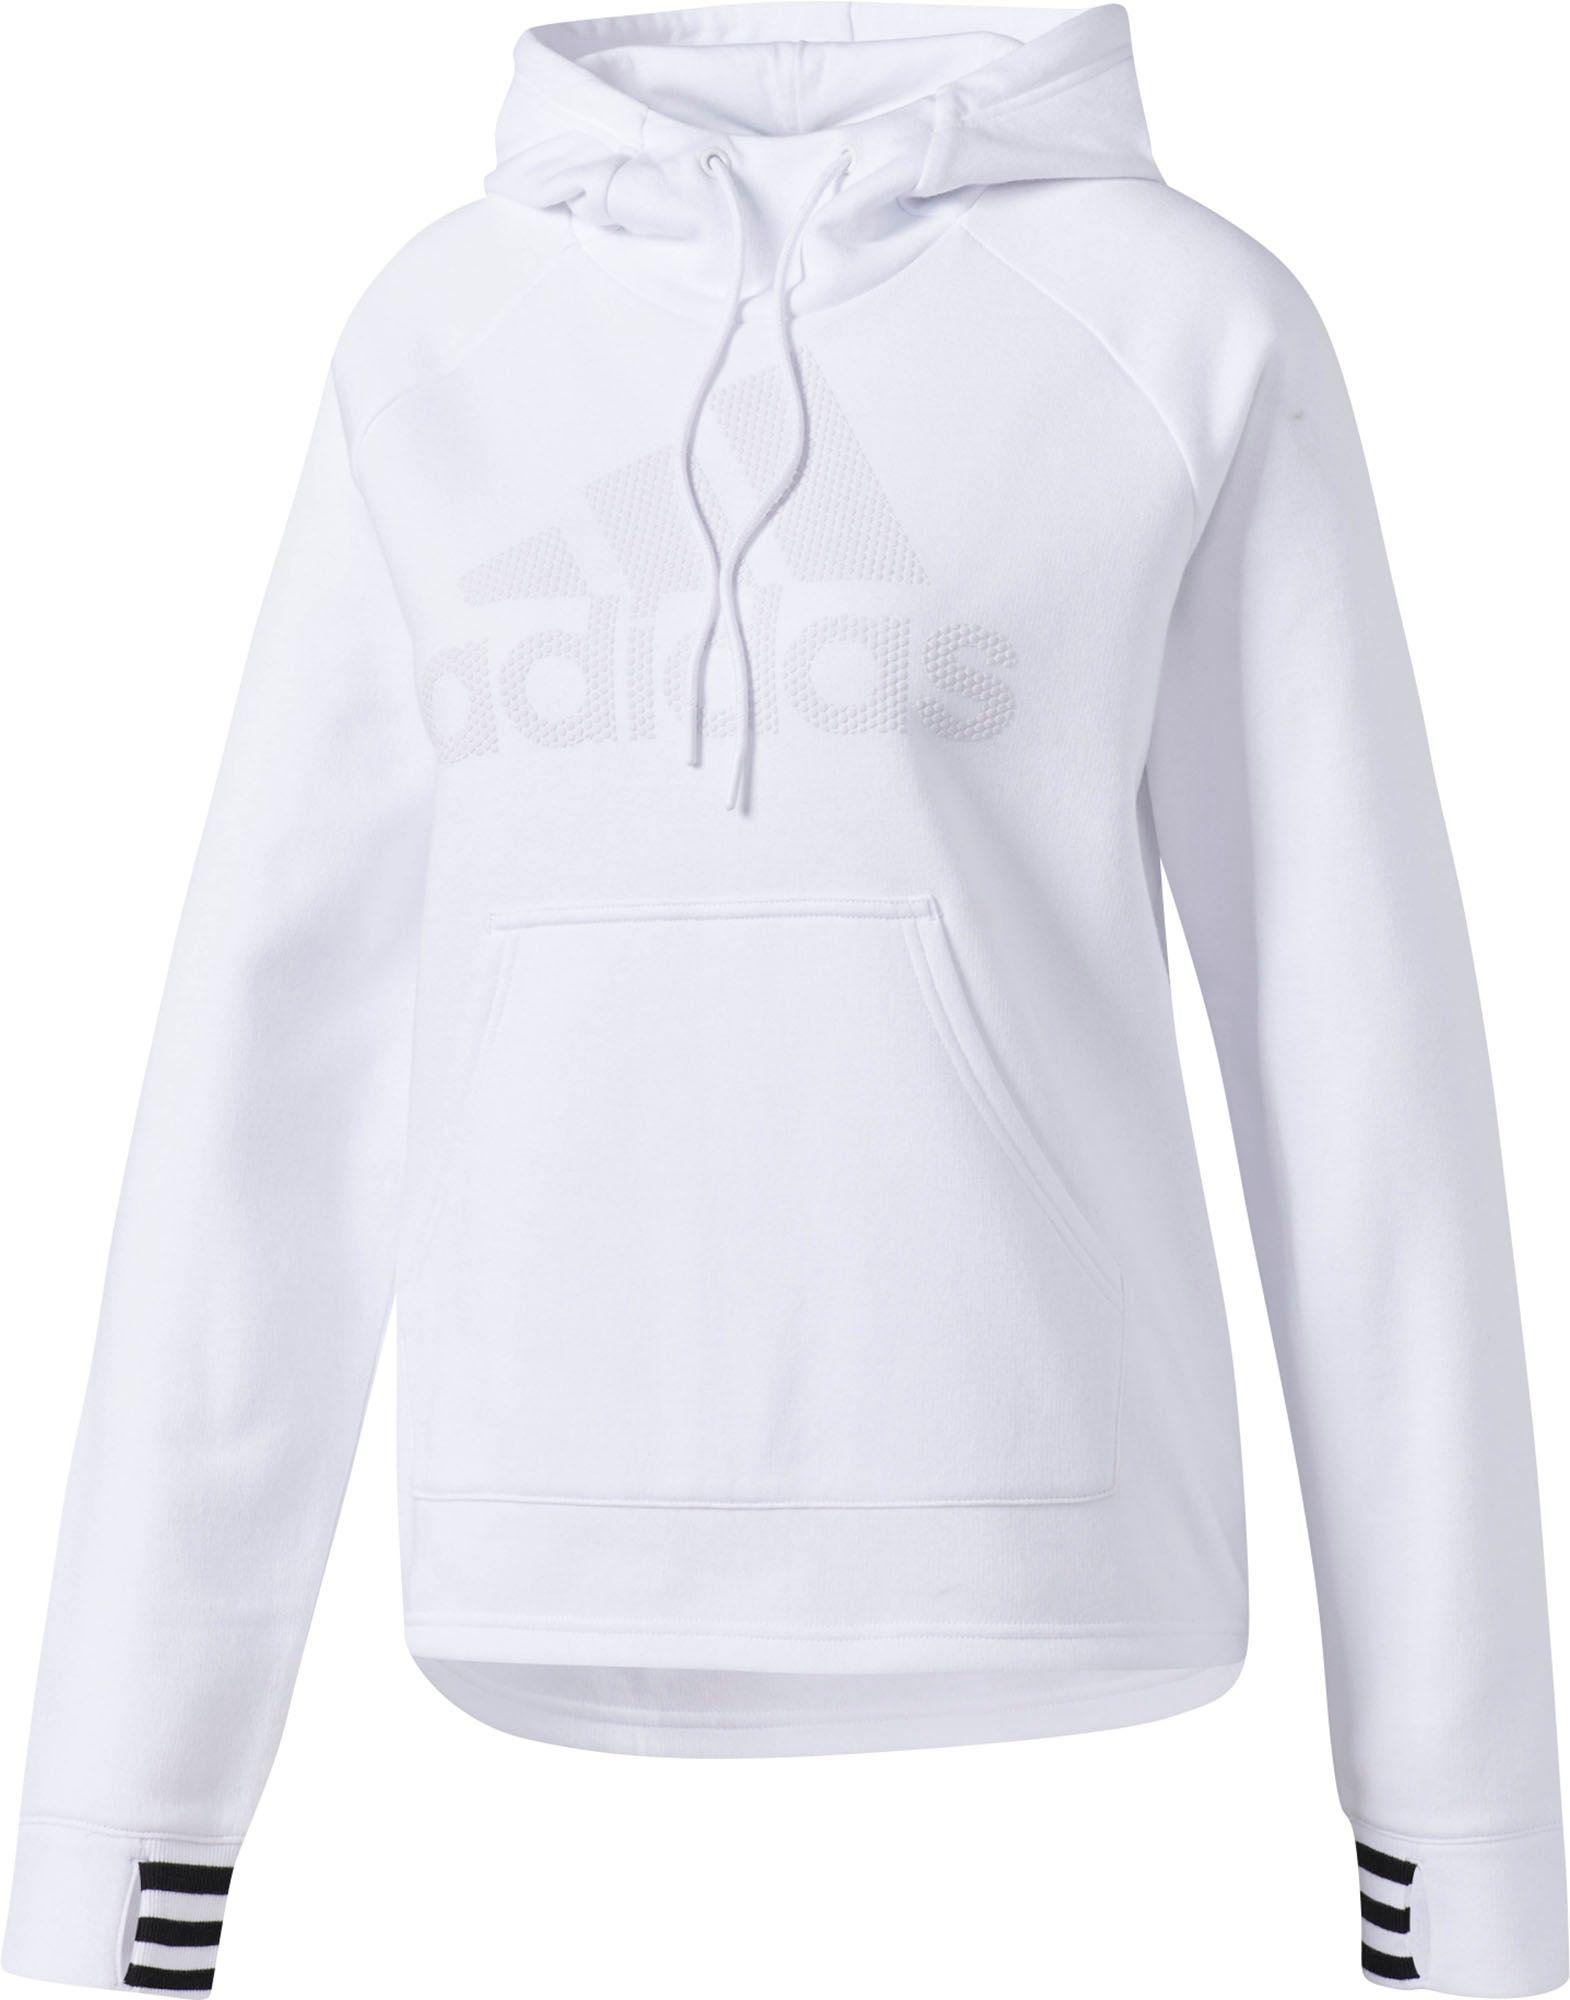 white adidas hoodie Online Shopping for Women, Men, Kids Fashion &  Lifestyle|Free Delivery & Returns! -